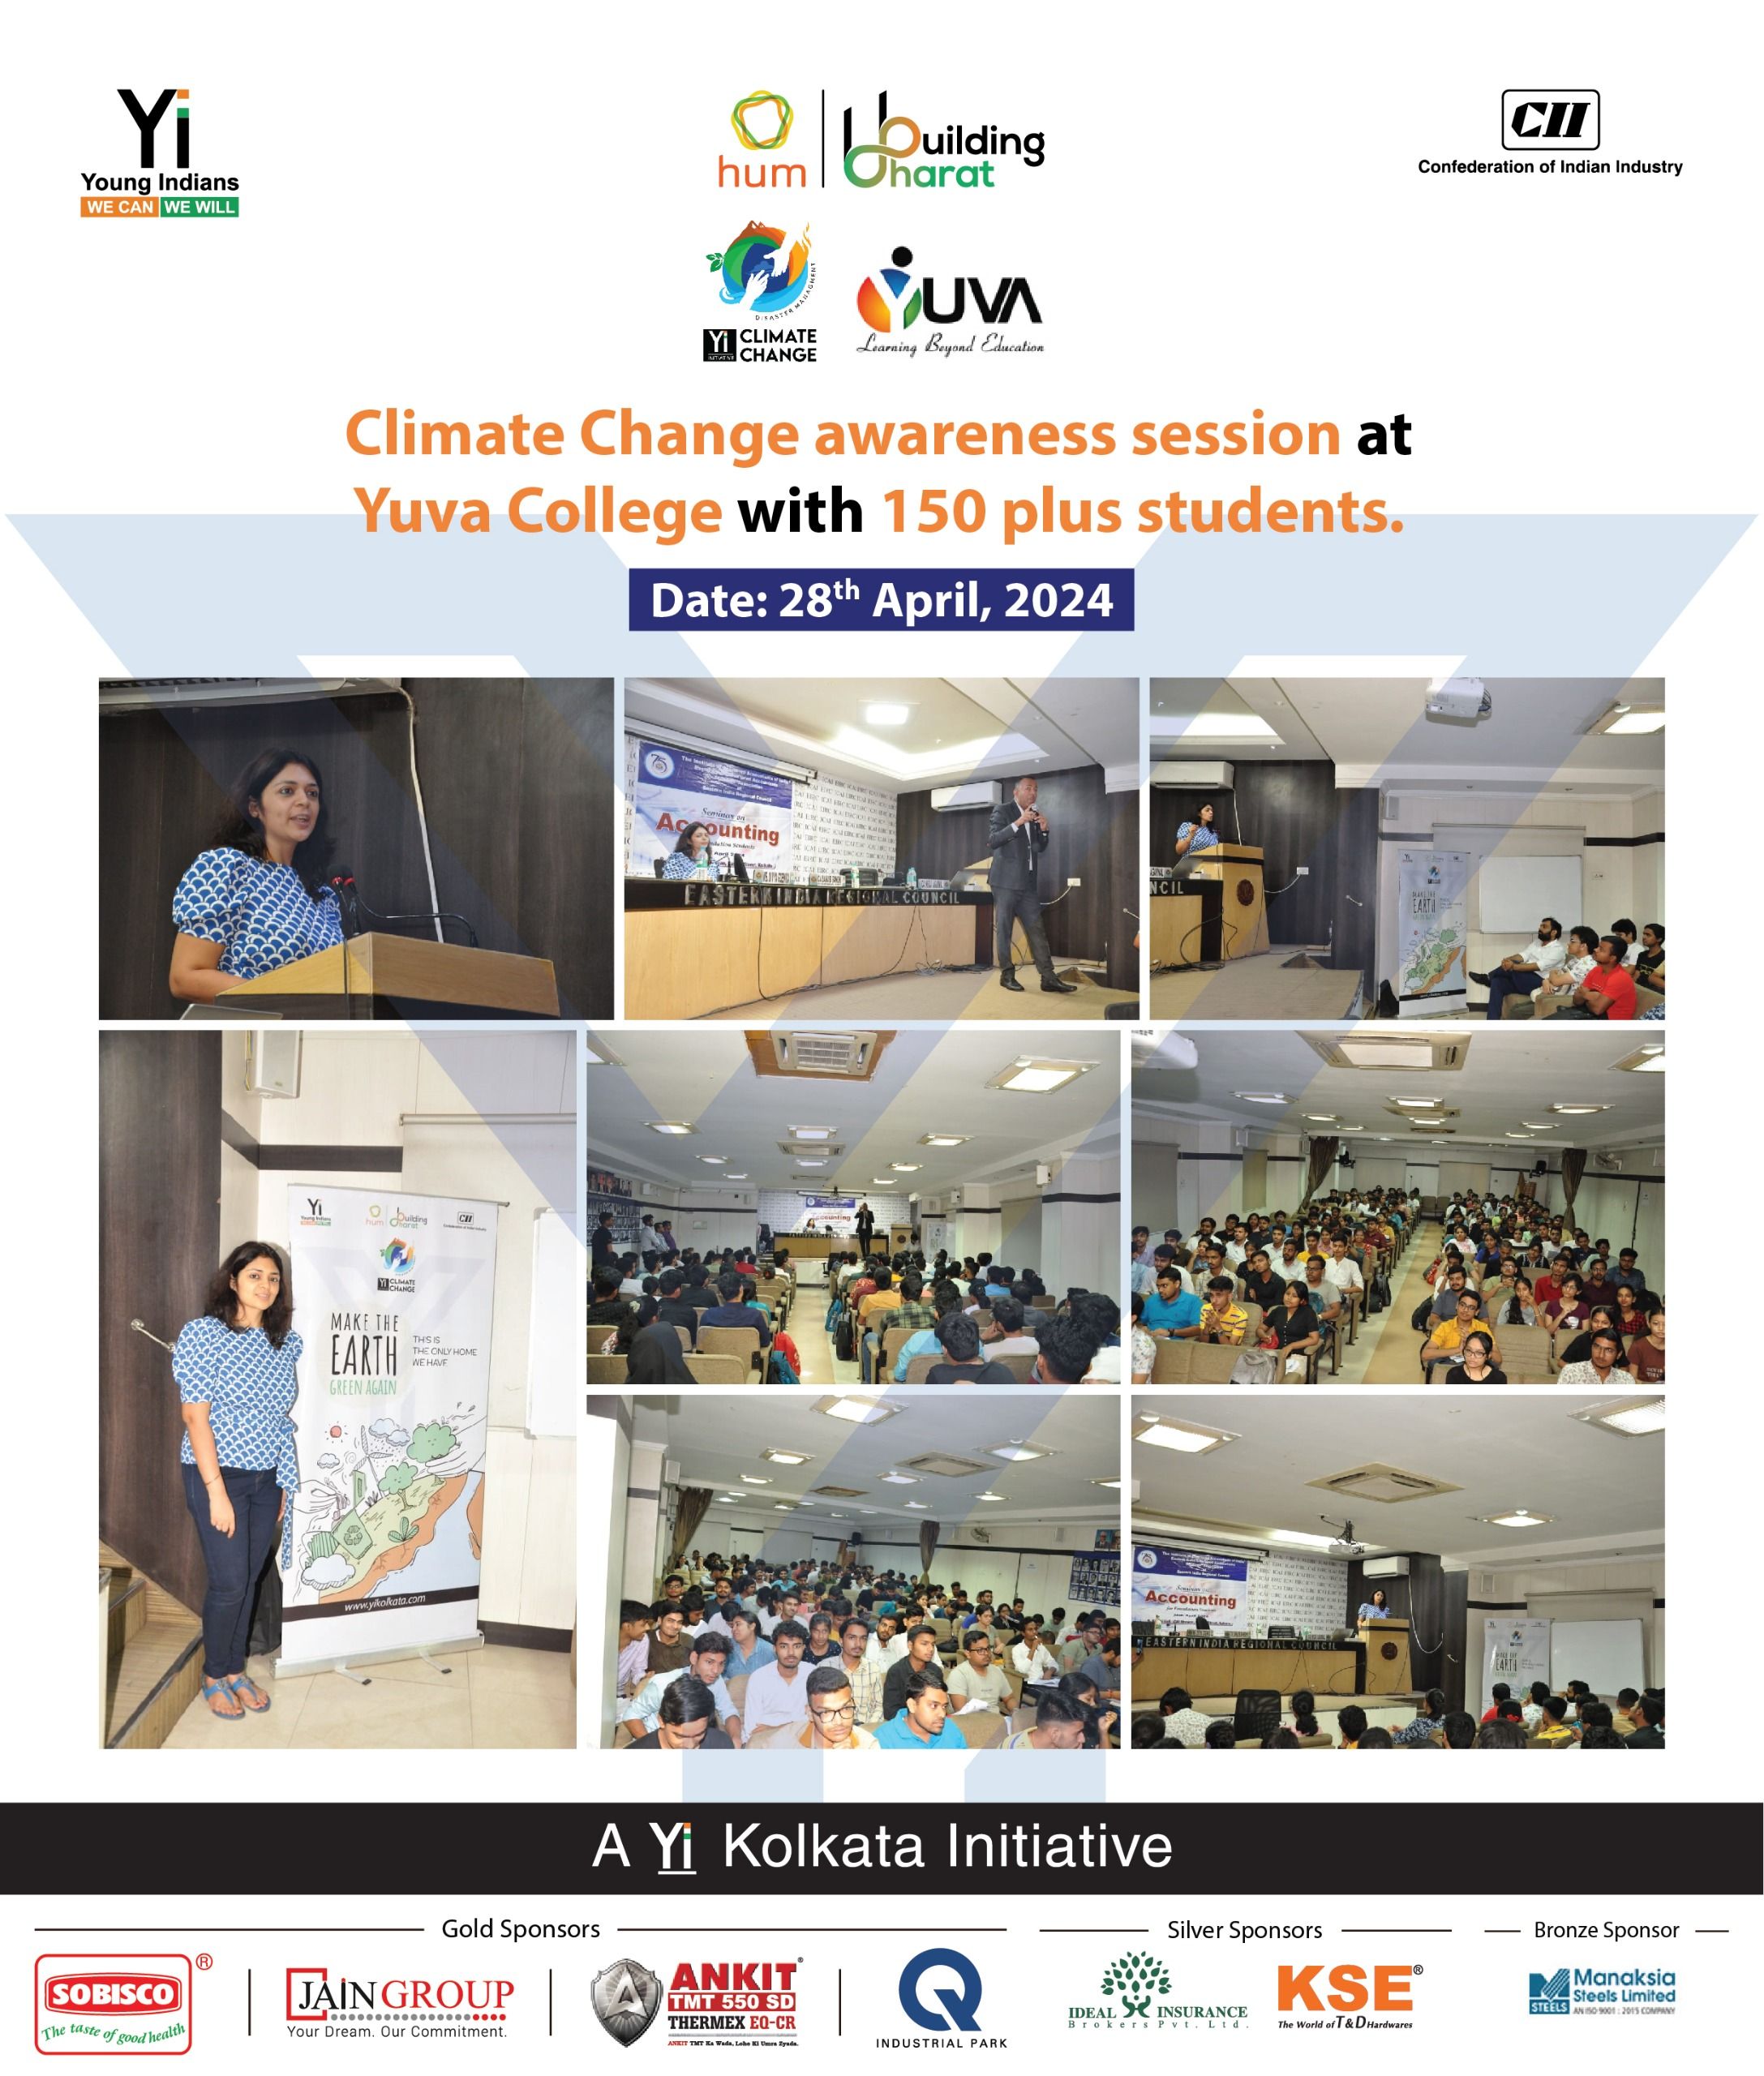 Yi24 | Climate Change Awareness Session at Yuva College with 150 plus students